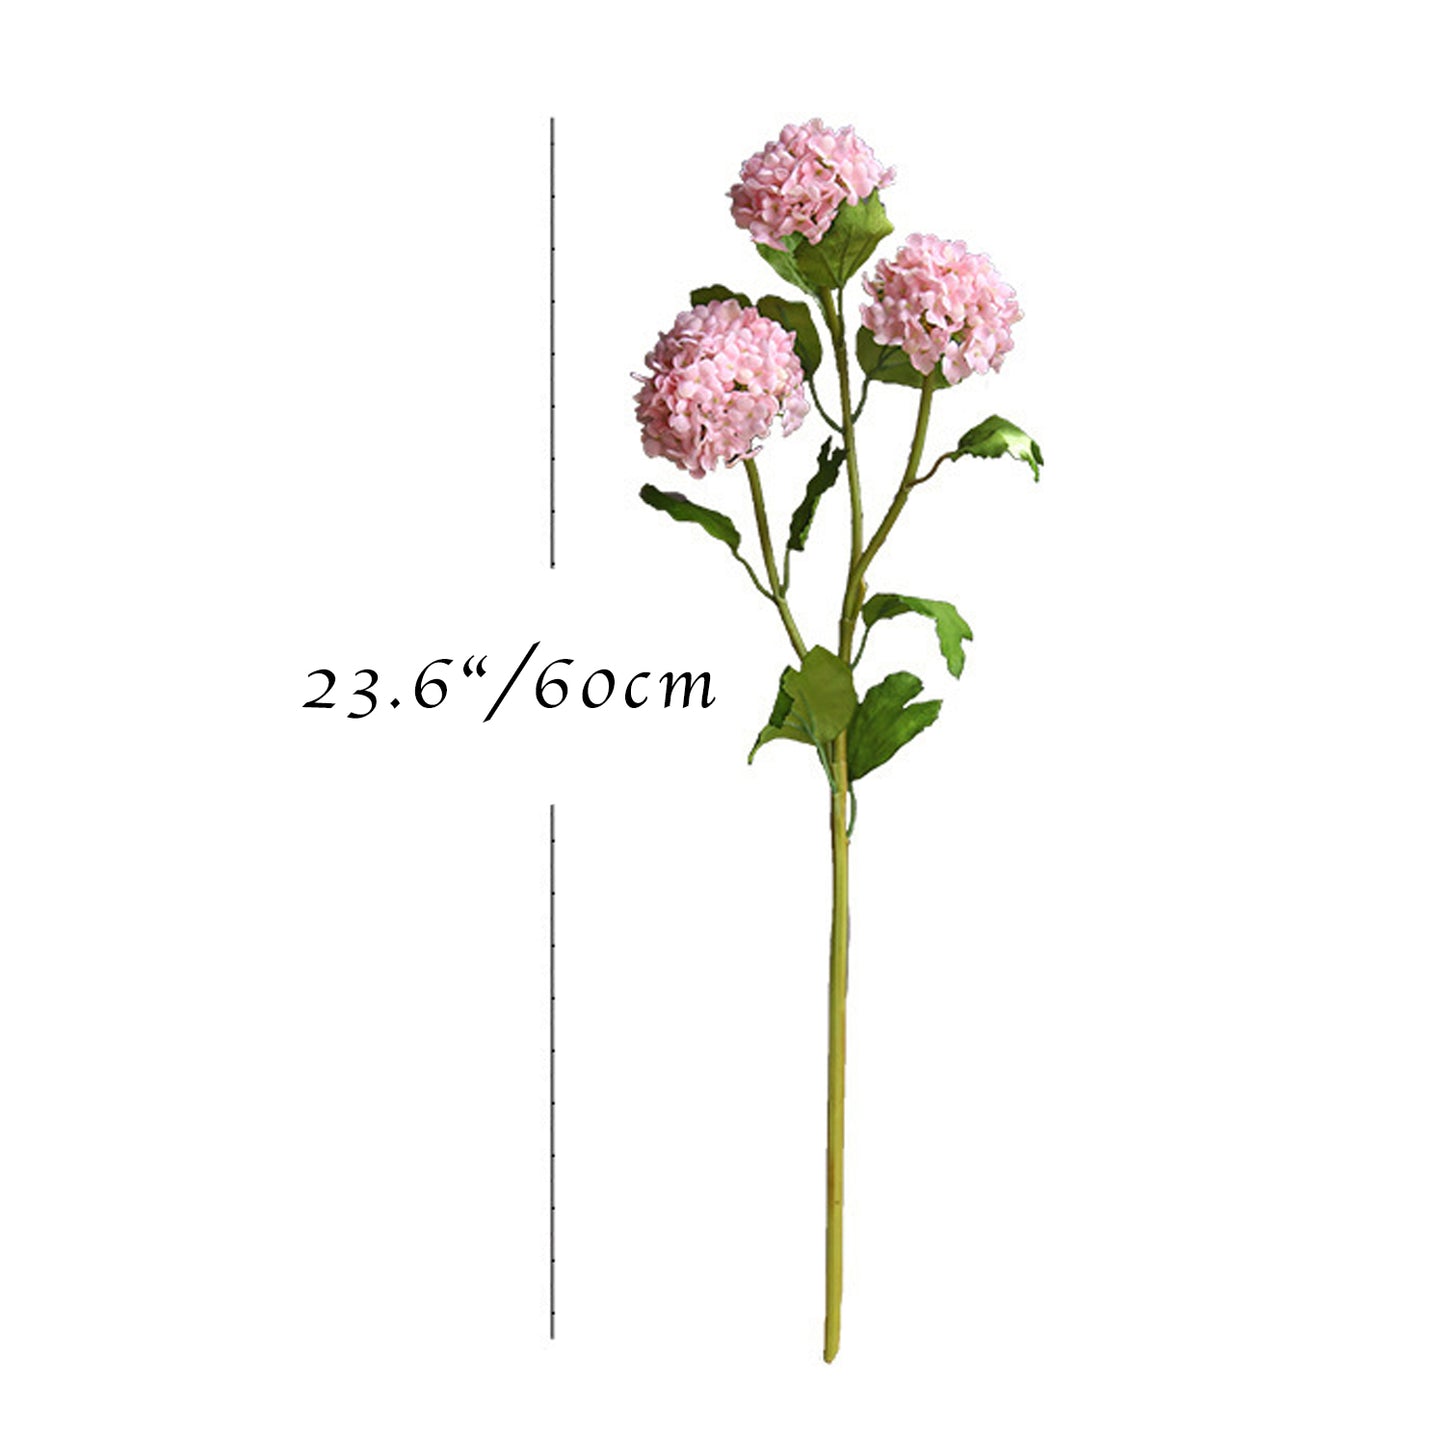 2 Stems Chineses Snowball Flowers | 5 Colors